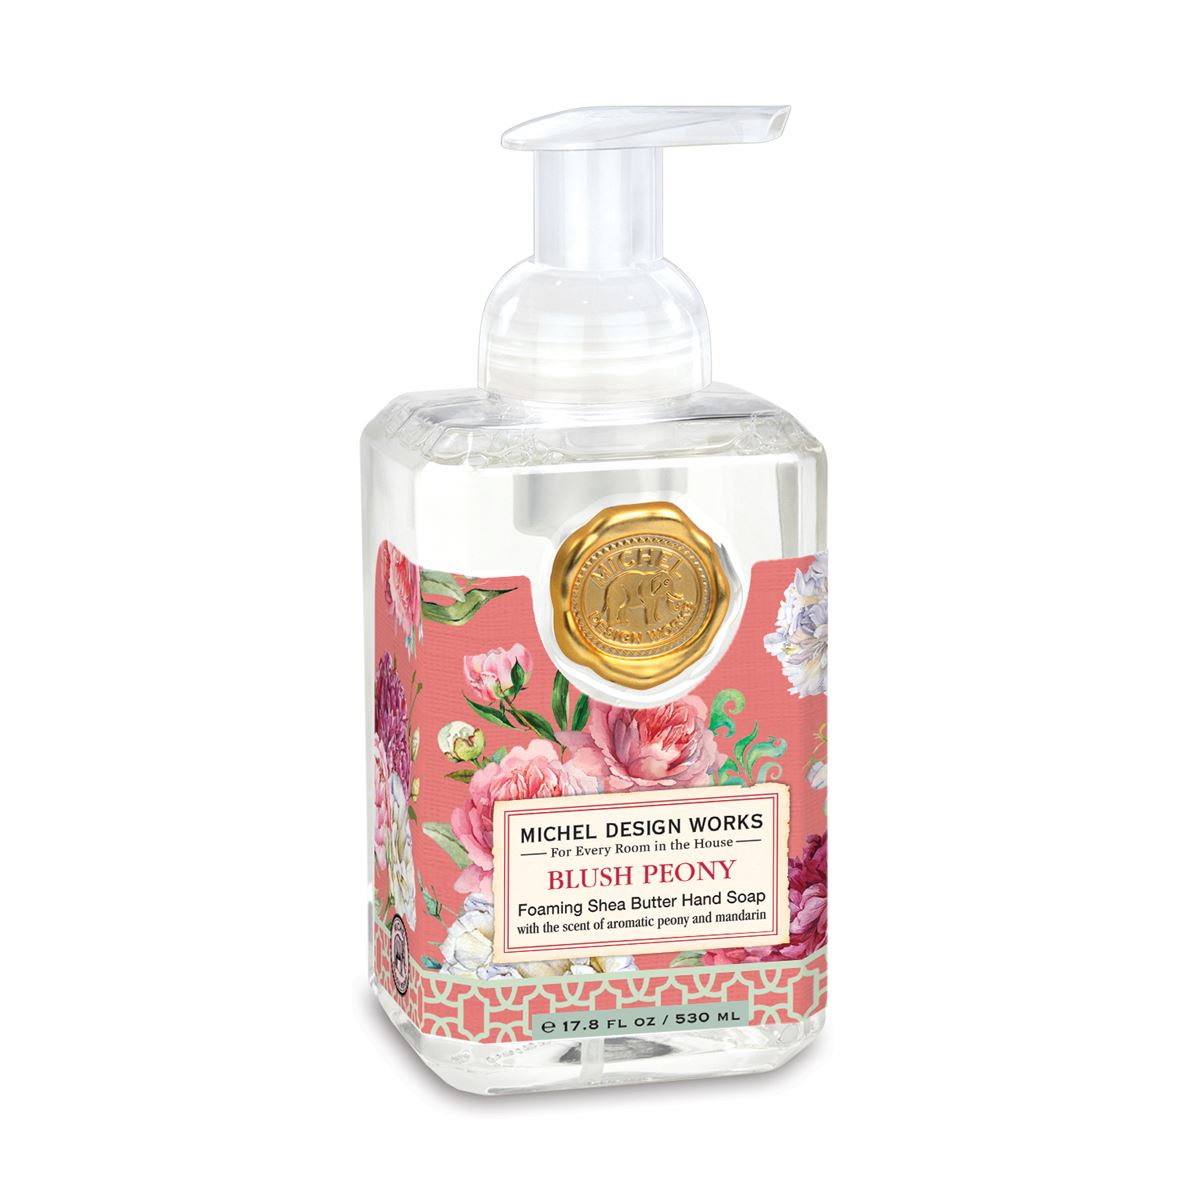 Blush Peony Foaming Hand Soap by Michel Design Works